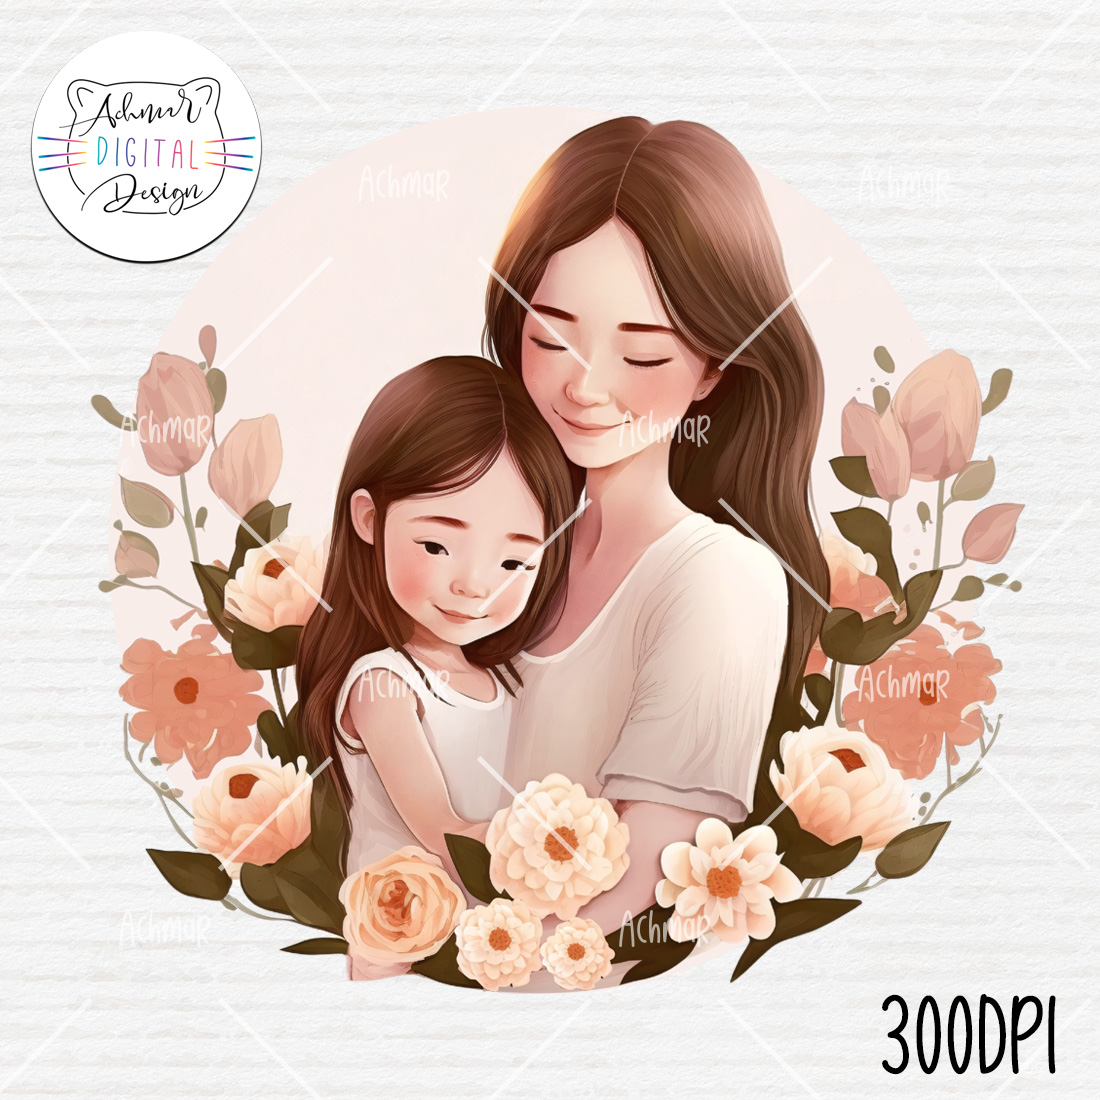 Mom & Daughter, Mother's Day Clip Art cover image.